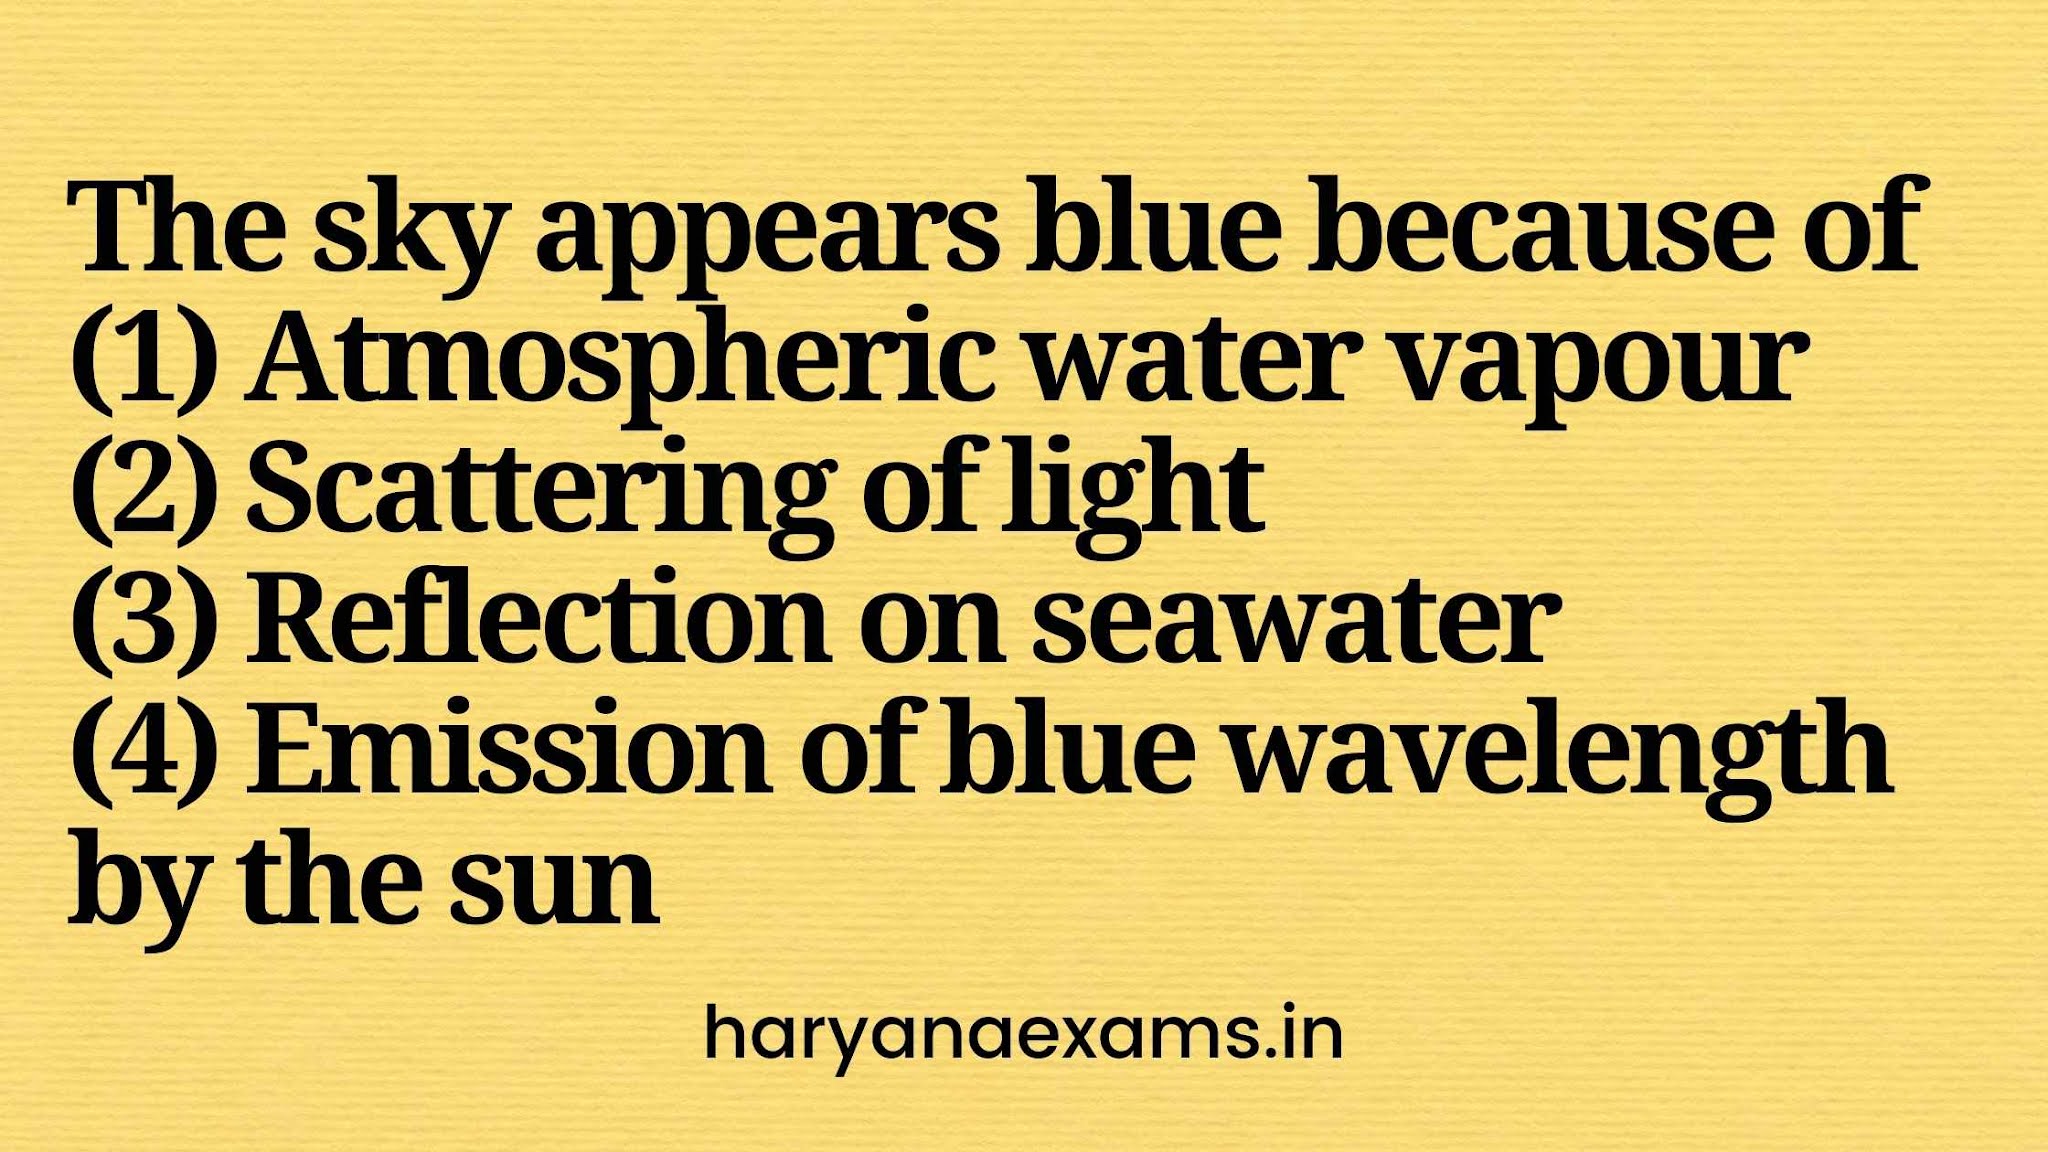 The sky appears blue because of   (1) Atmospheric water vapour   (2) Scattering of light   (3) Reflection on seawater   (4) Emission of blue wavelength by the sun